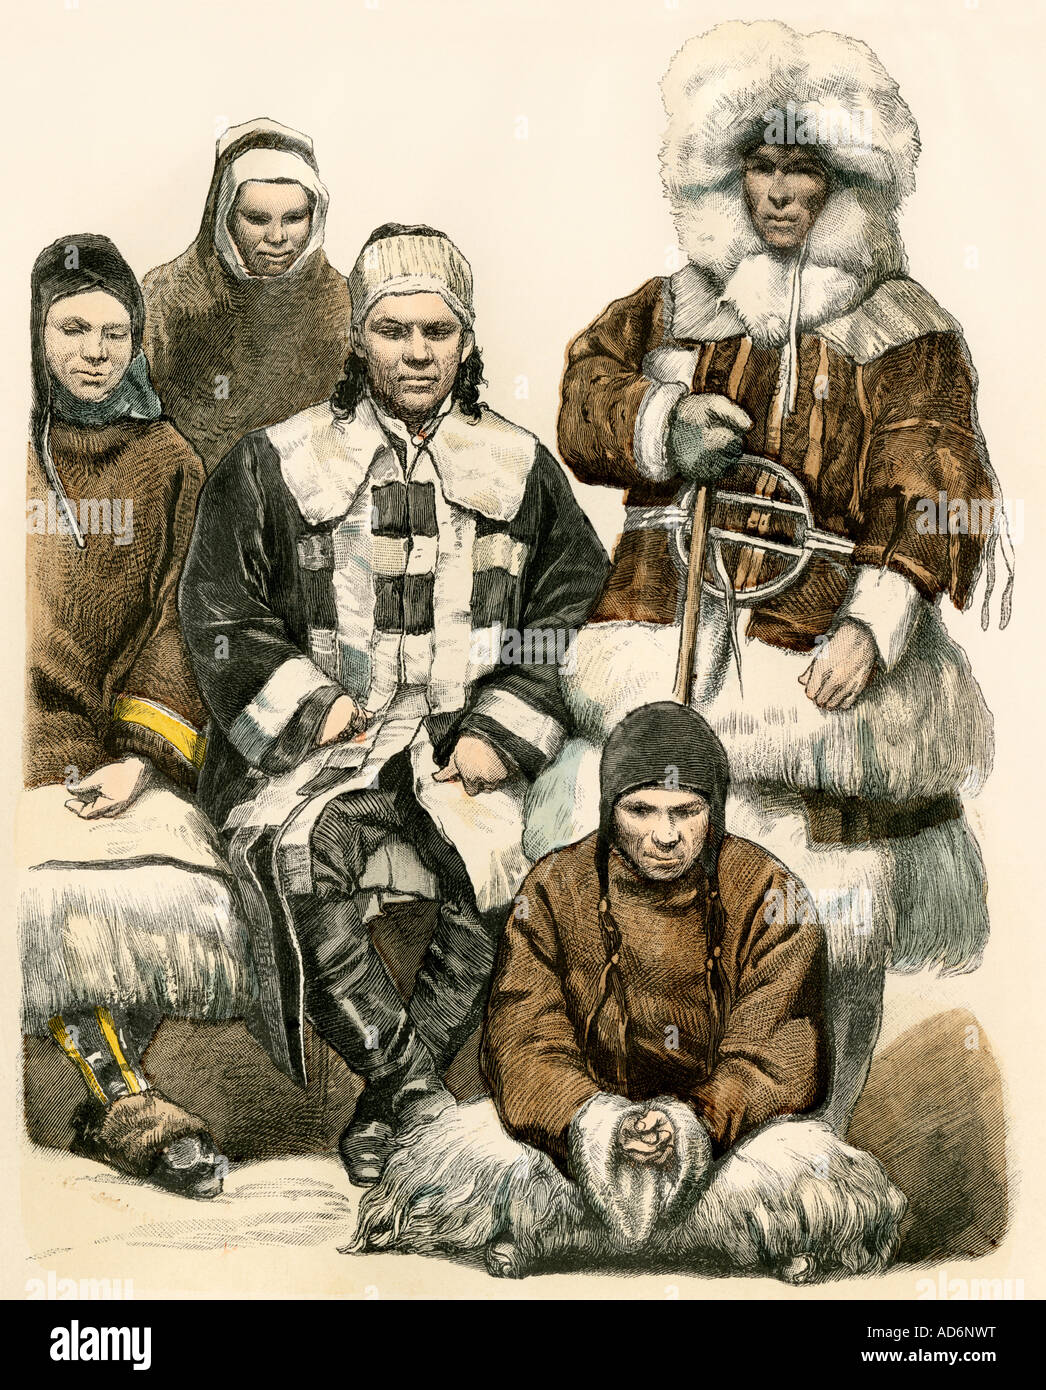 Nomads of the Russian northern regions 1800s. Hand-colored print Stock Photo